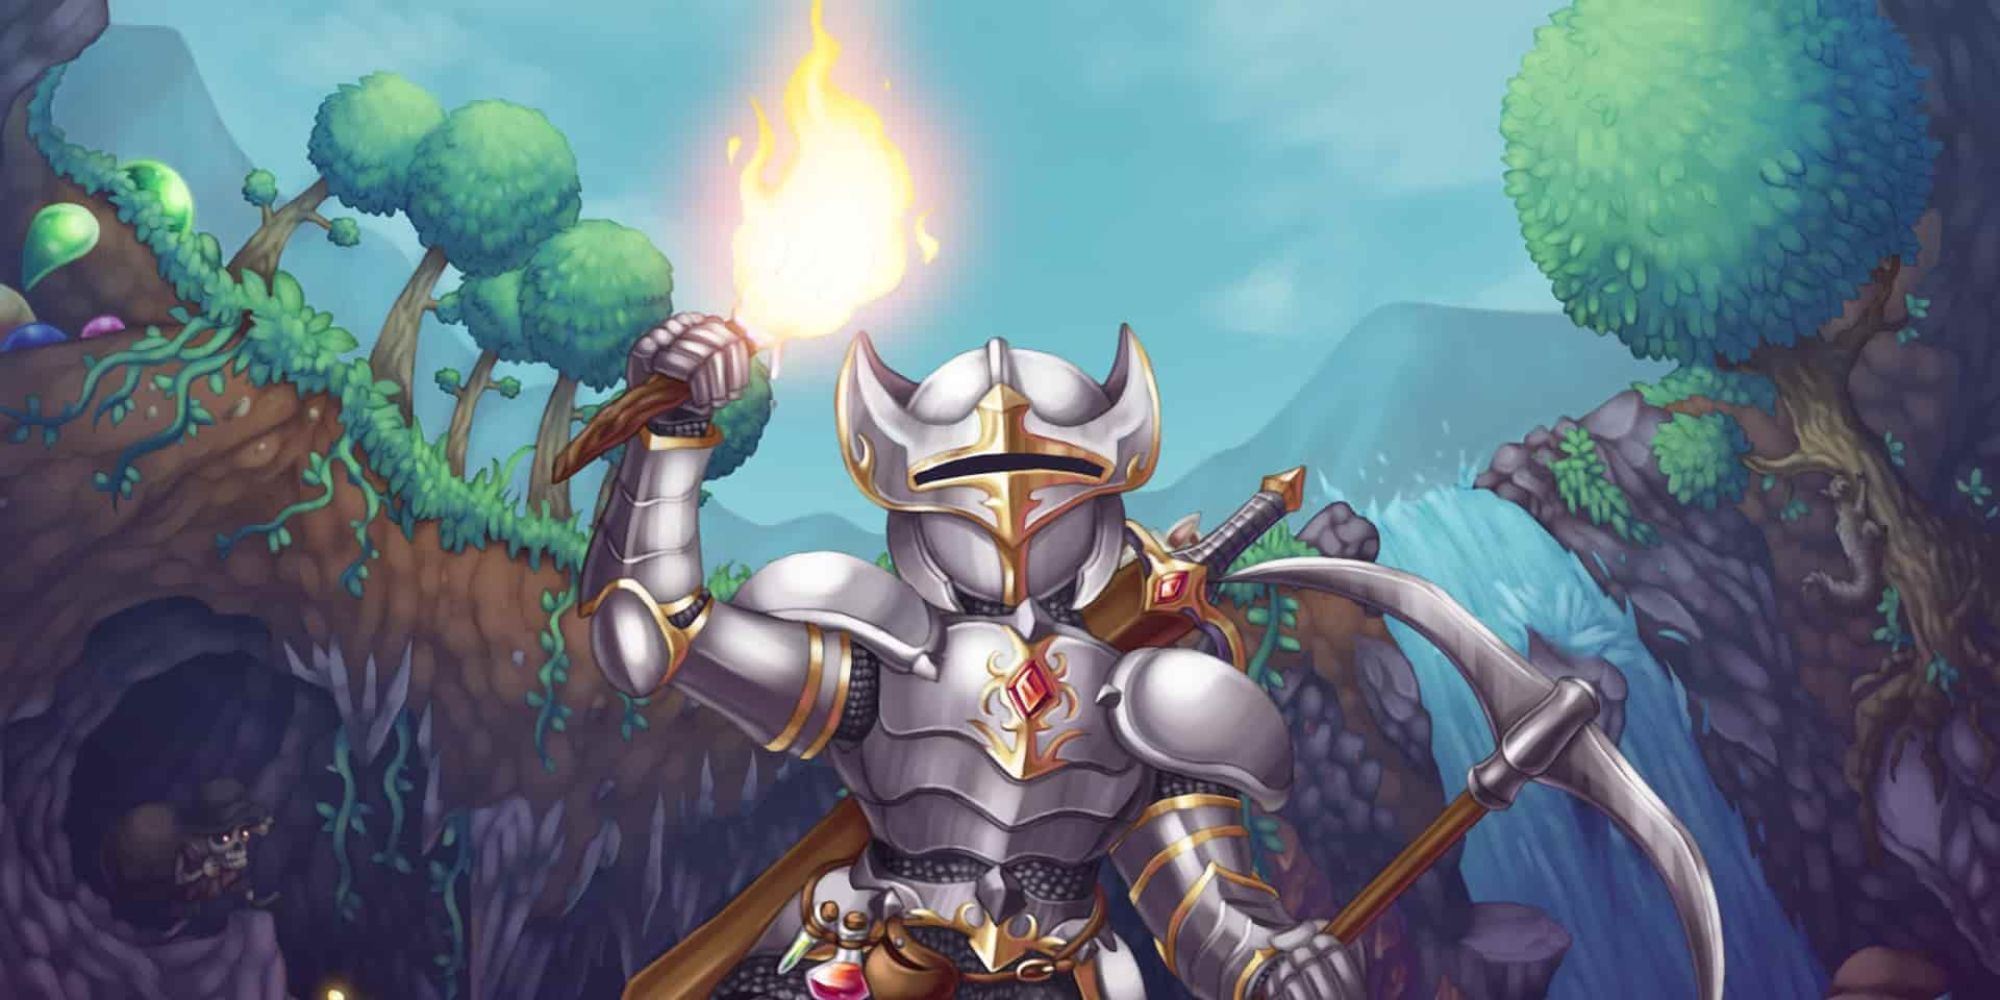 Terraria's key art showing a knight holding a flaming torch